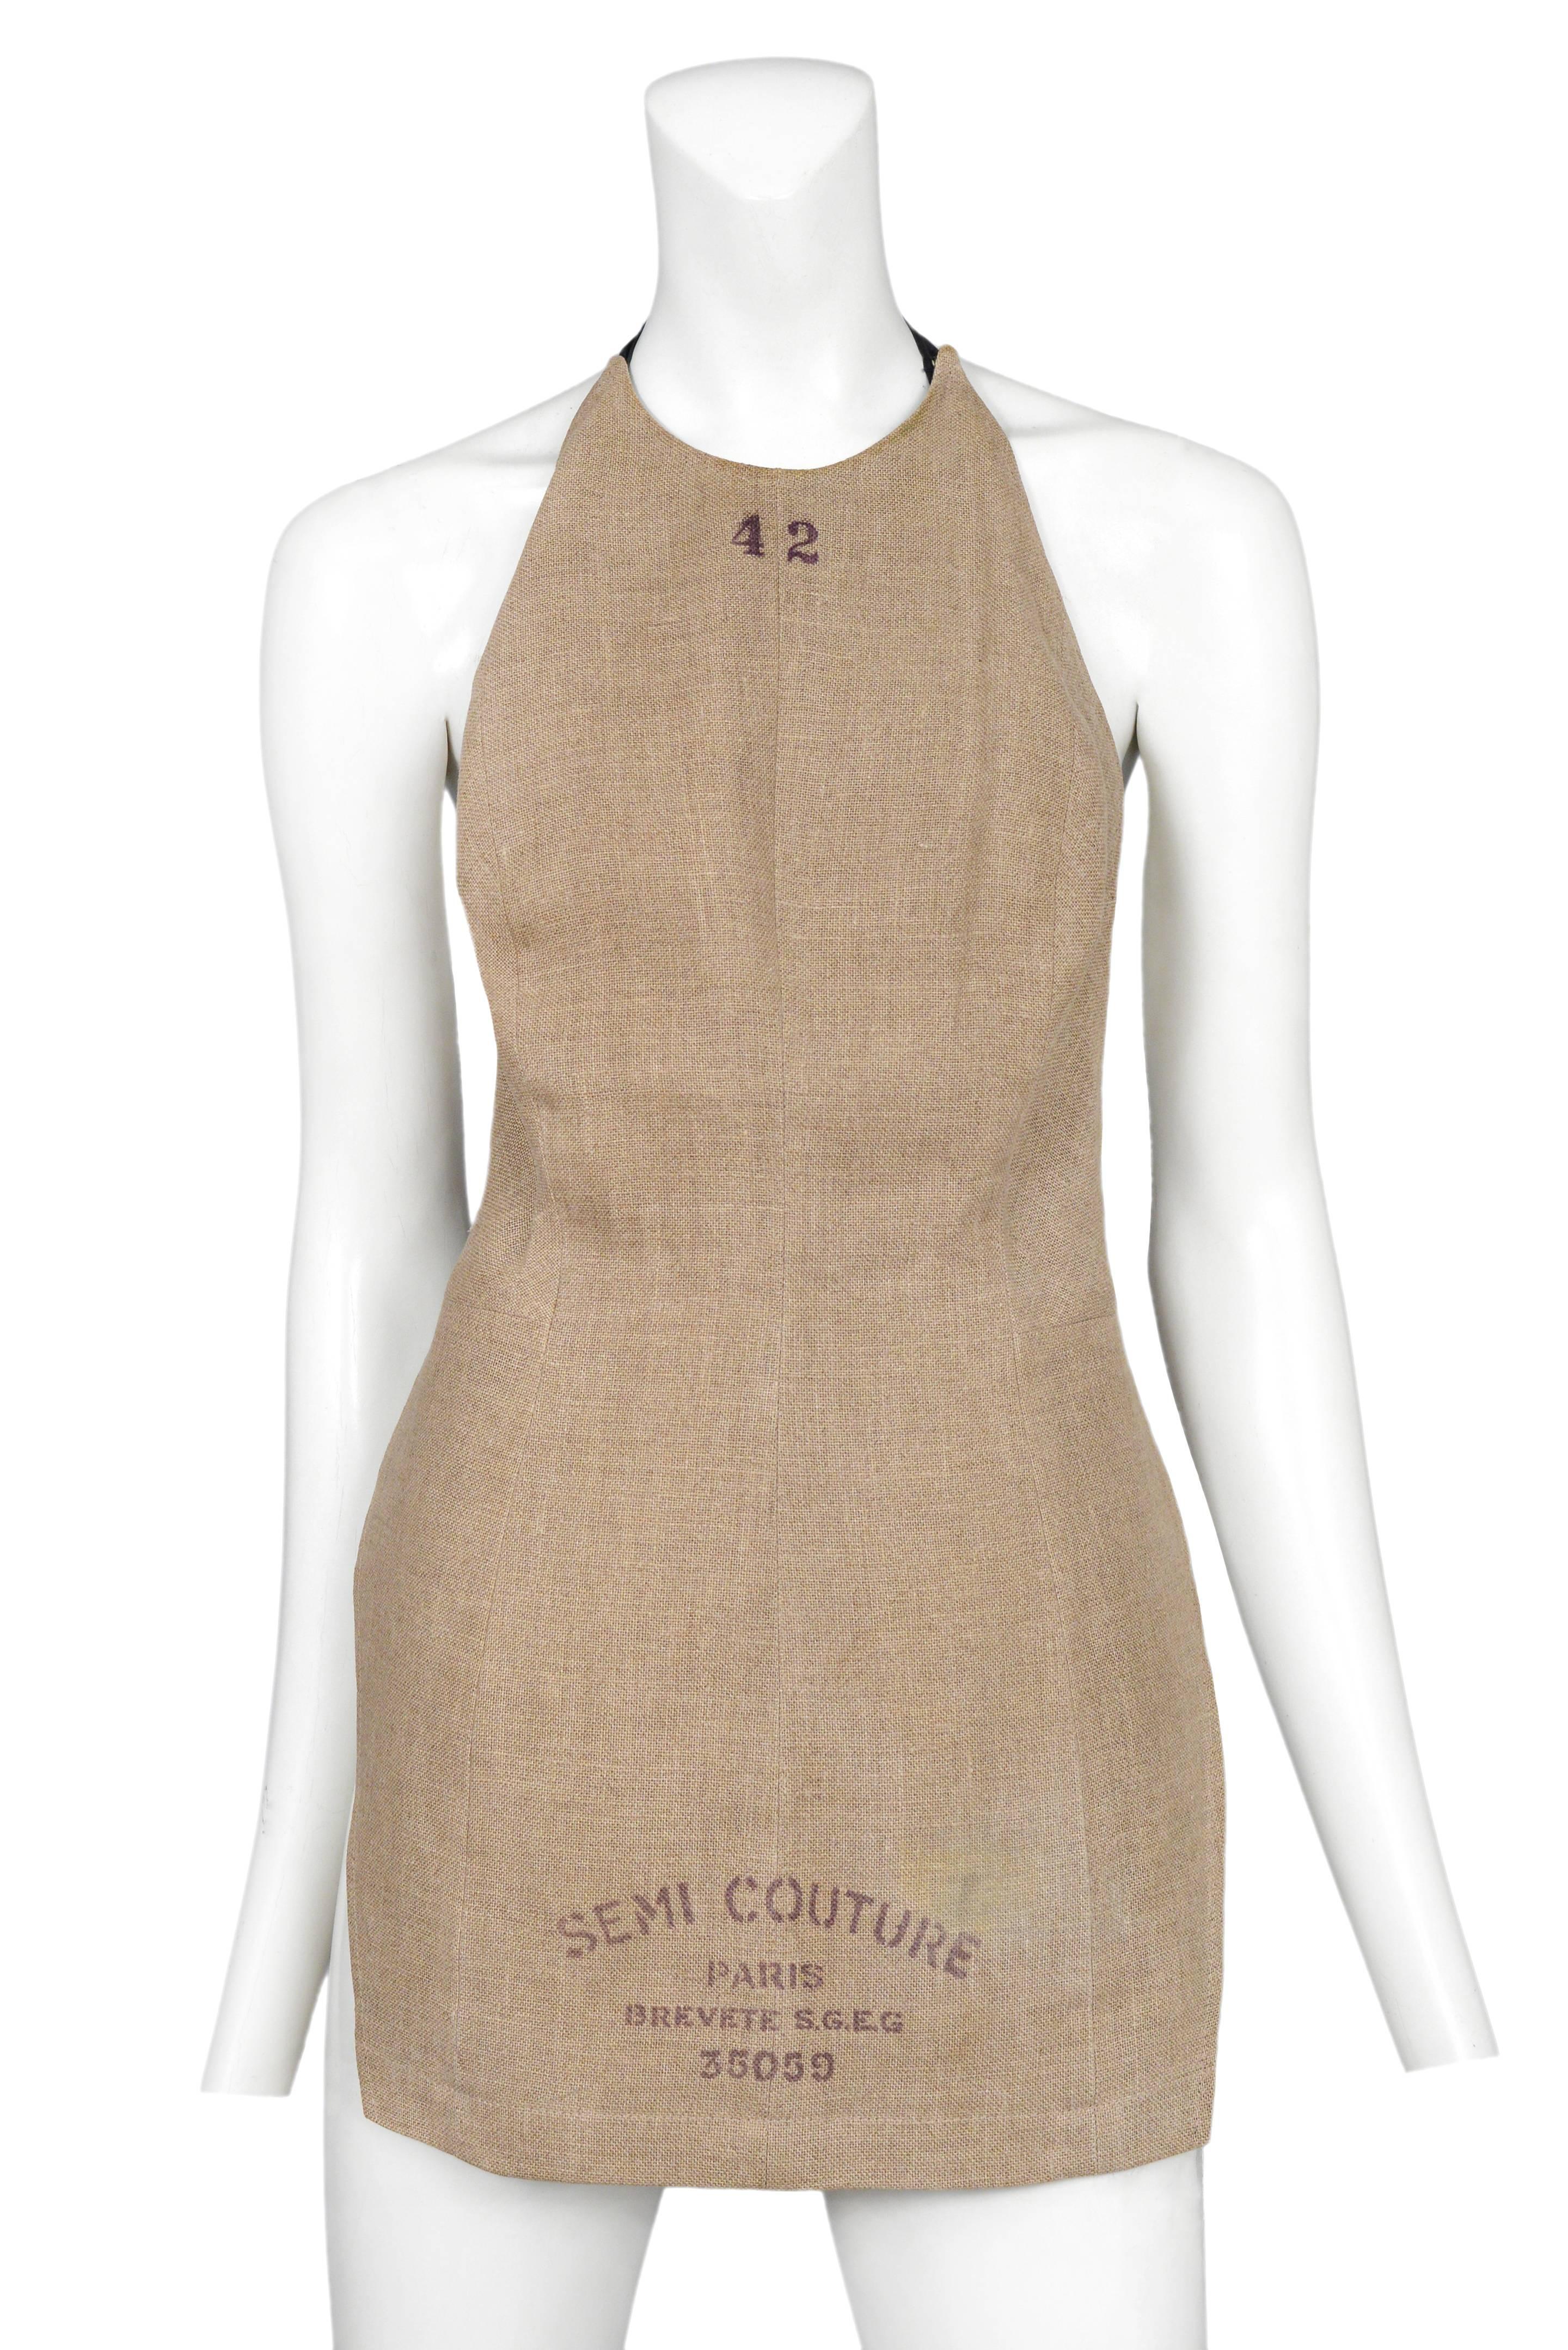 Iconic Vintage Maison Martin Margiela Semi-Couture dressmaker's bodice as an apron. Apron ties at back. From the 1997 Collection.
Please inquire for additional images.